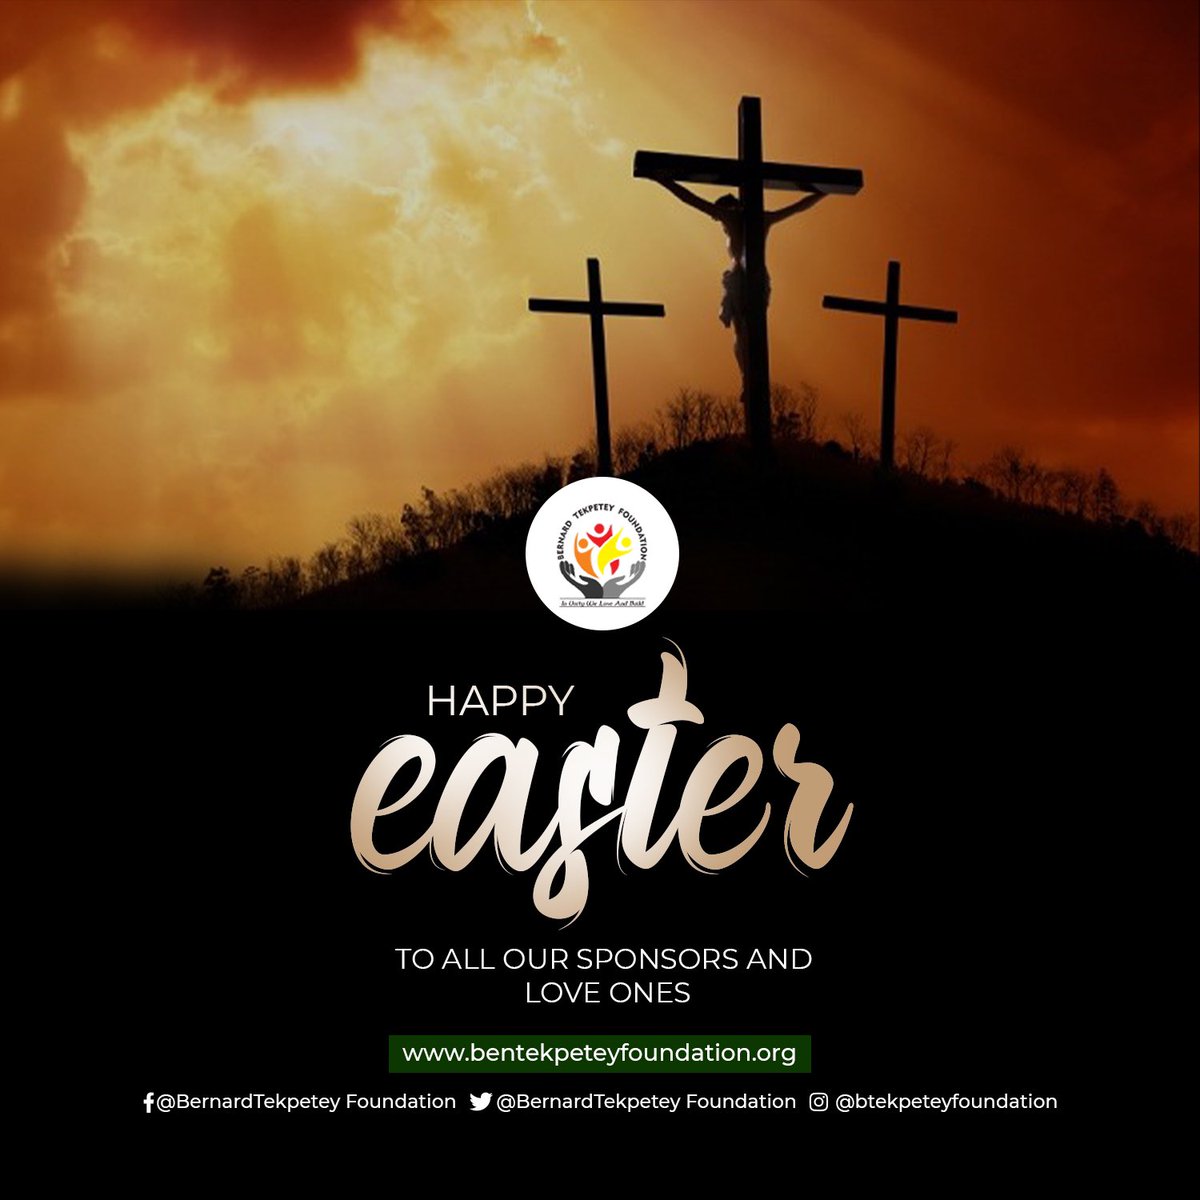 We proclaim the resurrection of Christ when his light illuminates the dark moments of our existence.

#itallaboutjesuschrist #easter #inunityweloveandbuild #togetherwecan #ResurrectionAndEternity